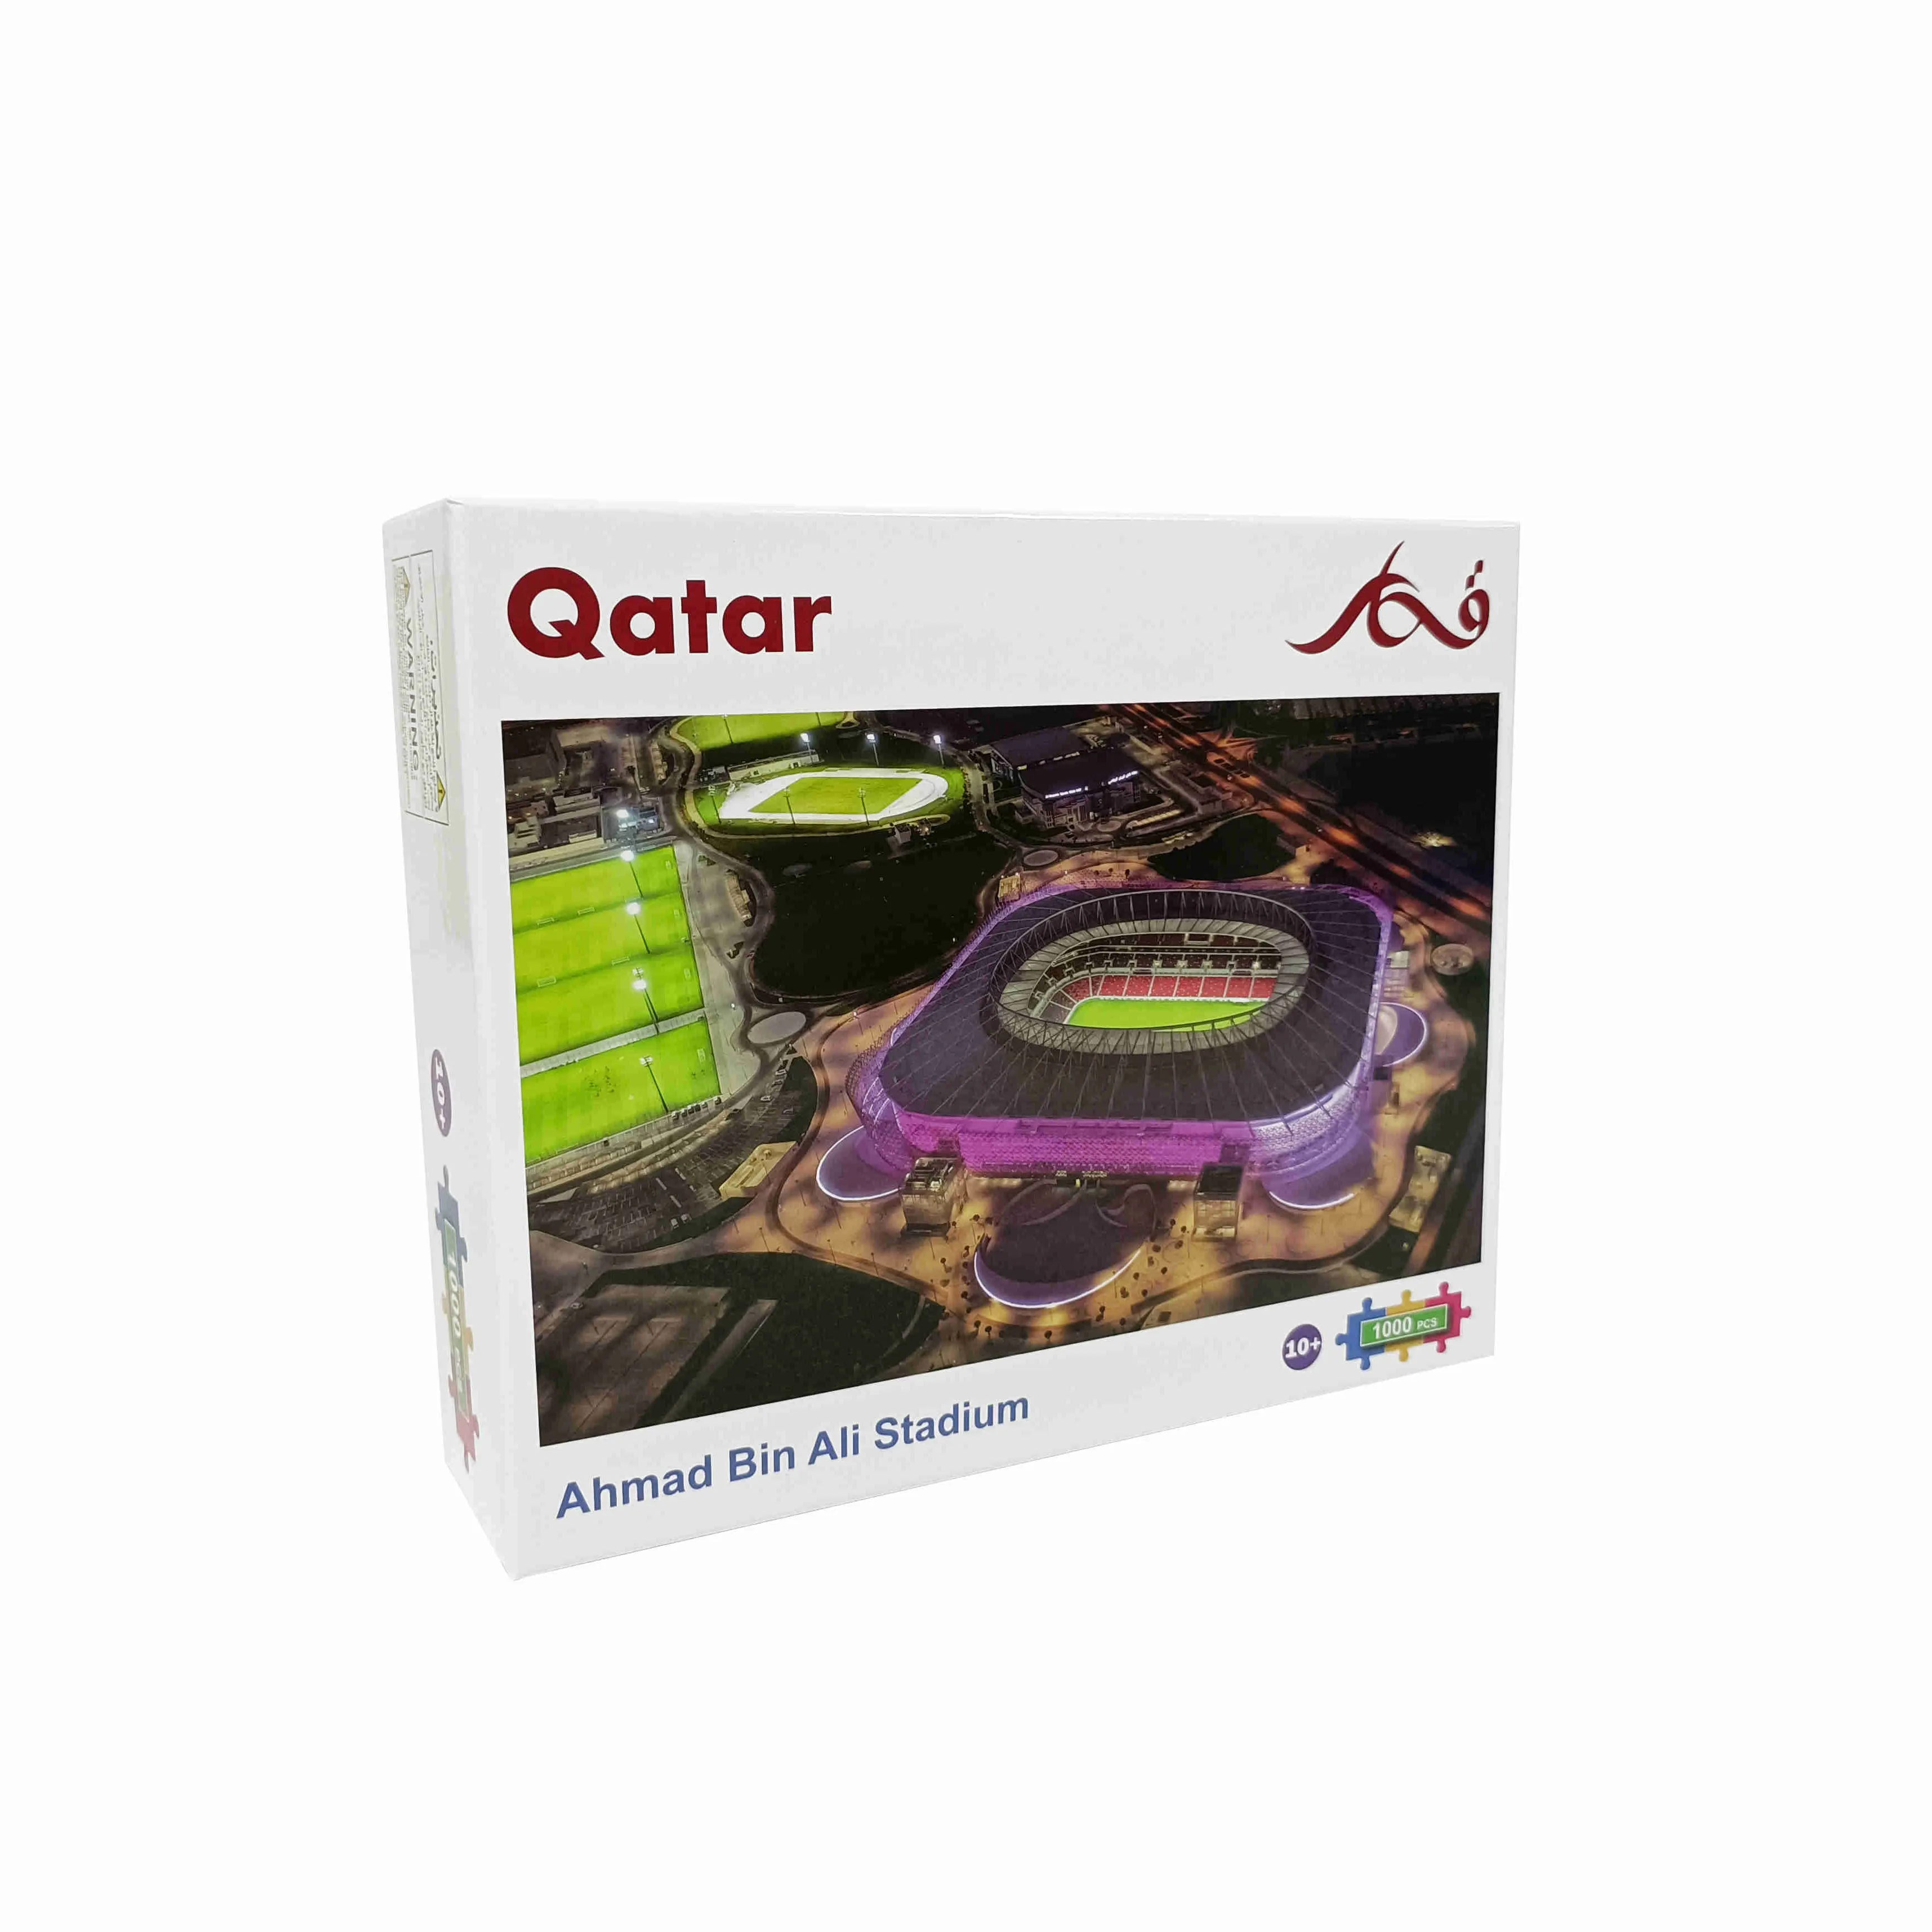 Special Design Sell Well New Type 1000 Pieces Jigsaw Puzzlethe Ahmad Bin Ali Stadium Puzzle New Hot Items Puzzle